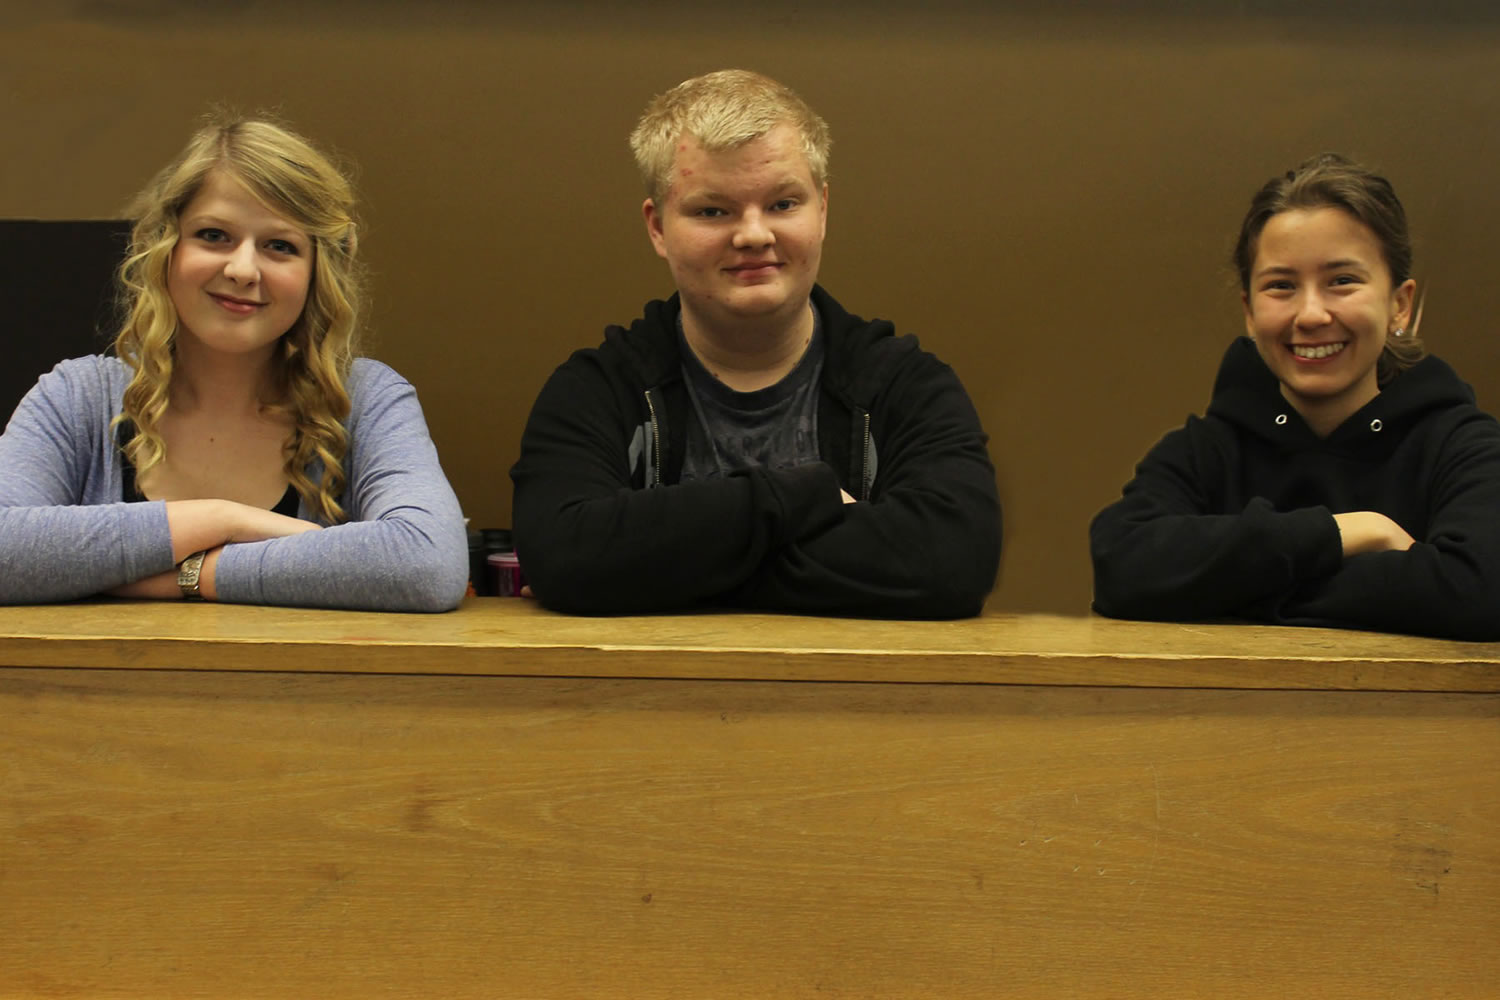 Battle Ground: Battle Ground High School students Sarah Russell, from left, Mattias Tyni, and Kimberly Snow were named outstanding music students by the Washington Music Education Association after a series of auditions this year.